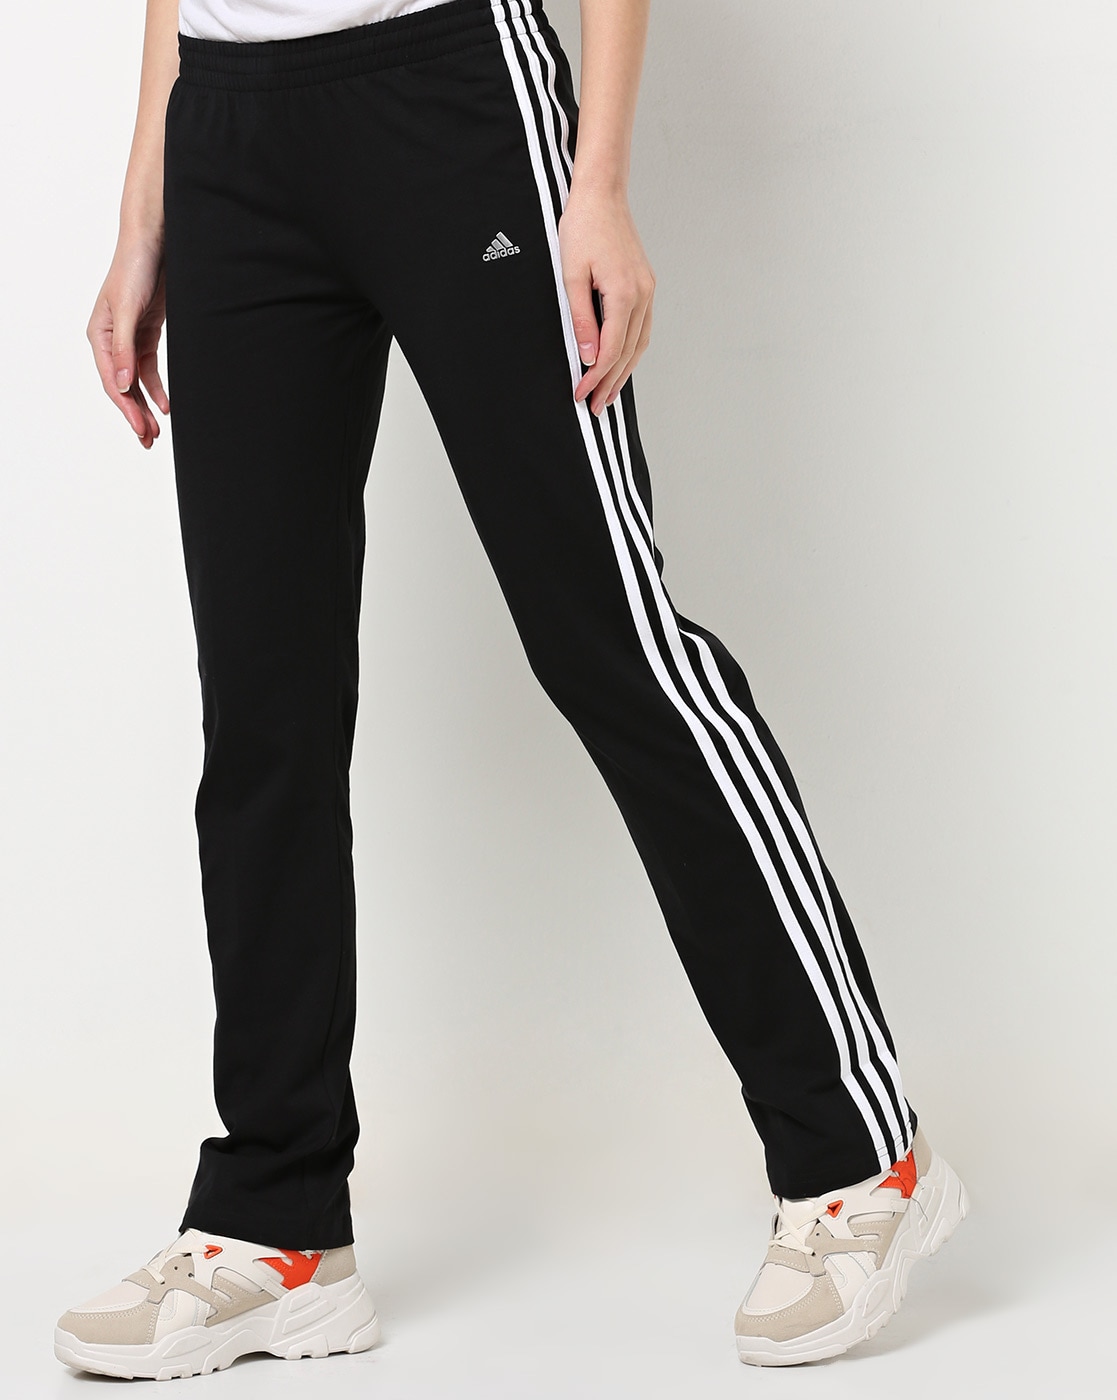 adidas track pants womens outfit